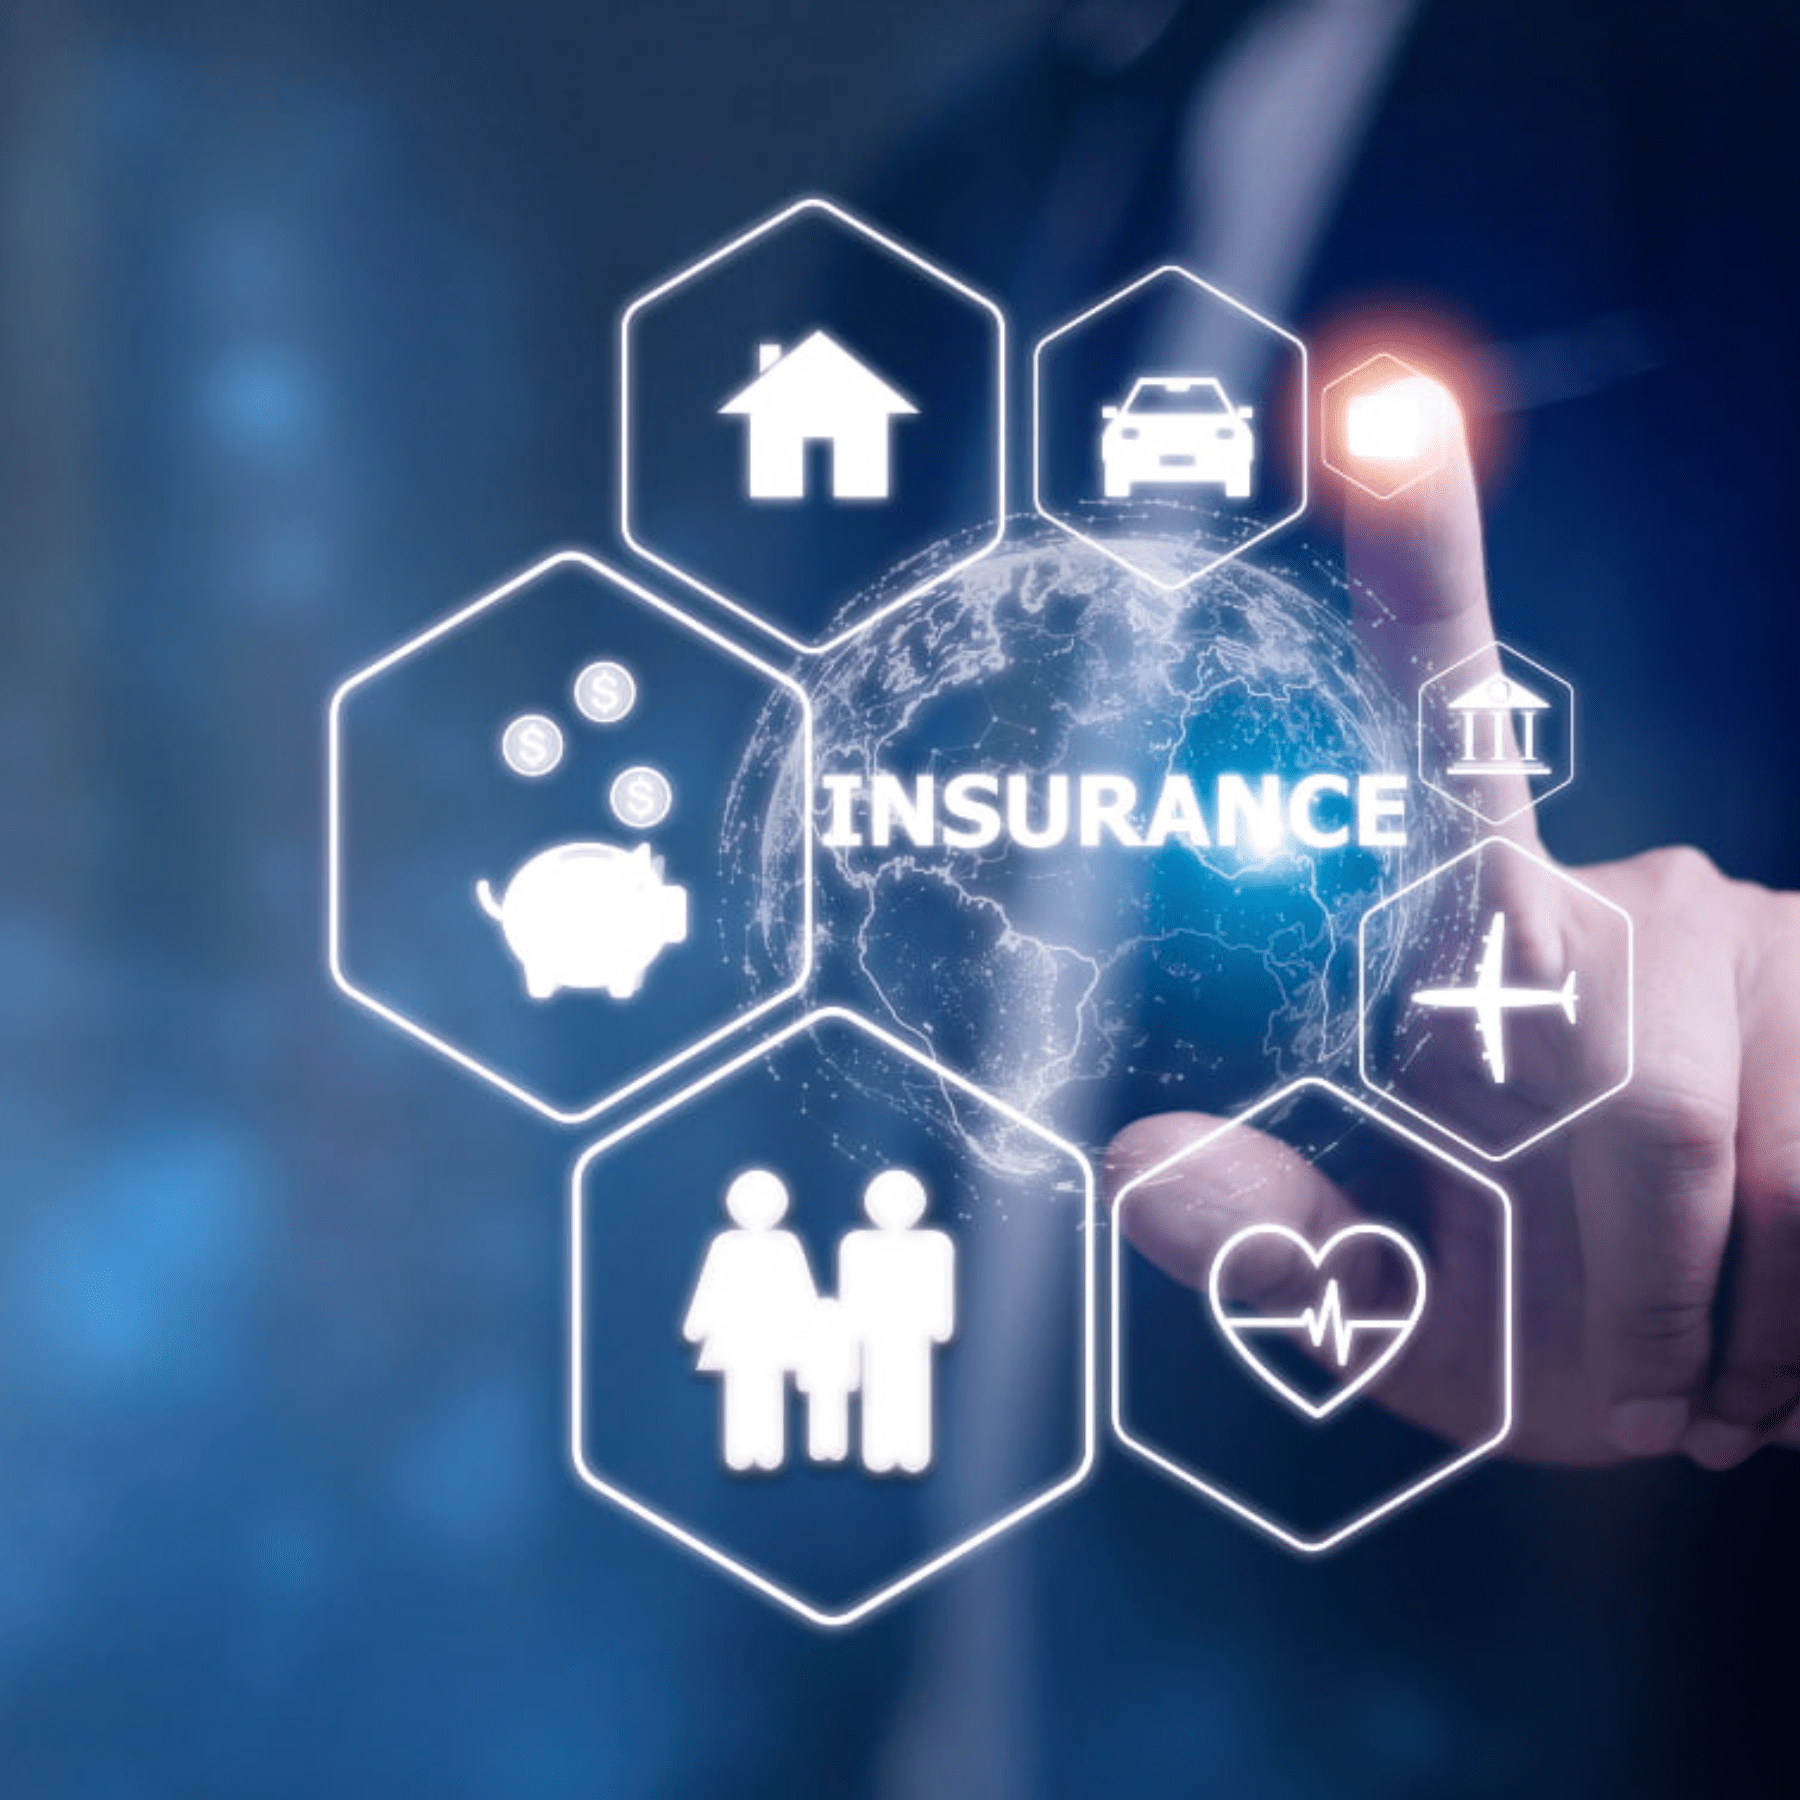 8 Essential Types of Insurance Everyone Should Know About